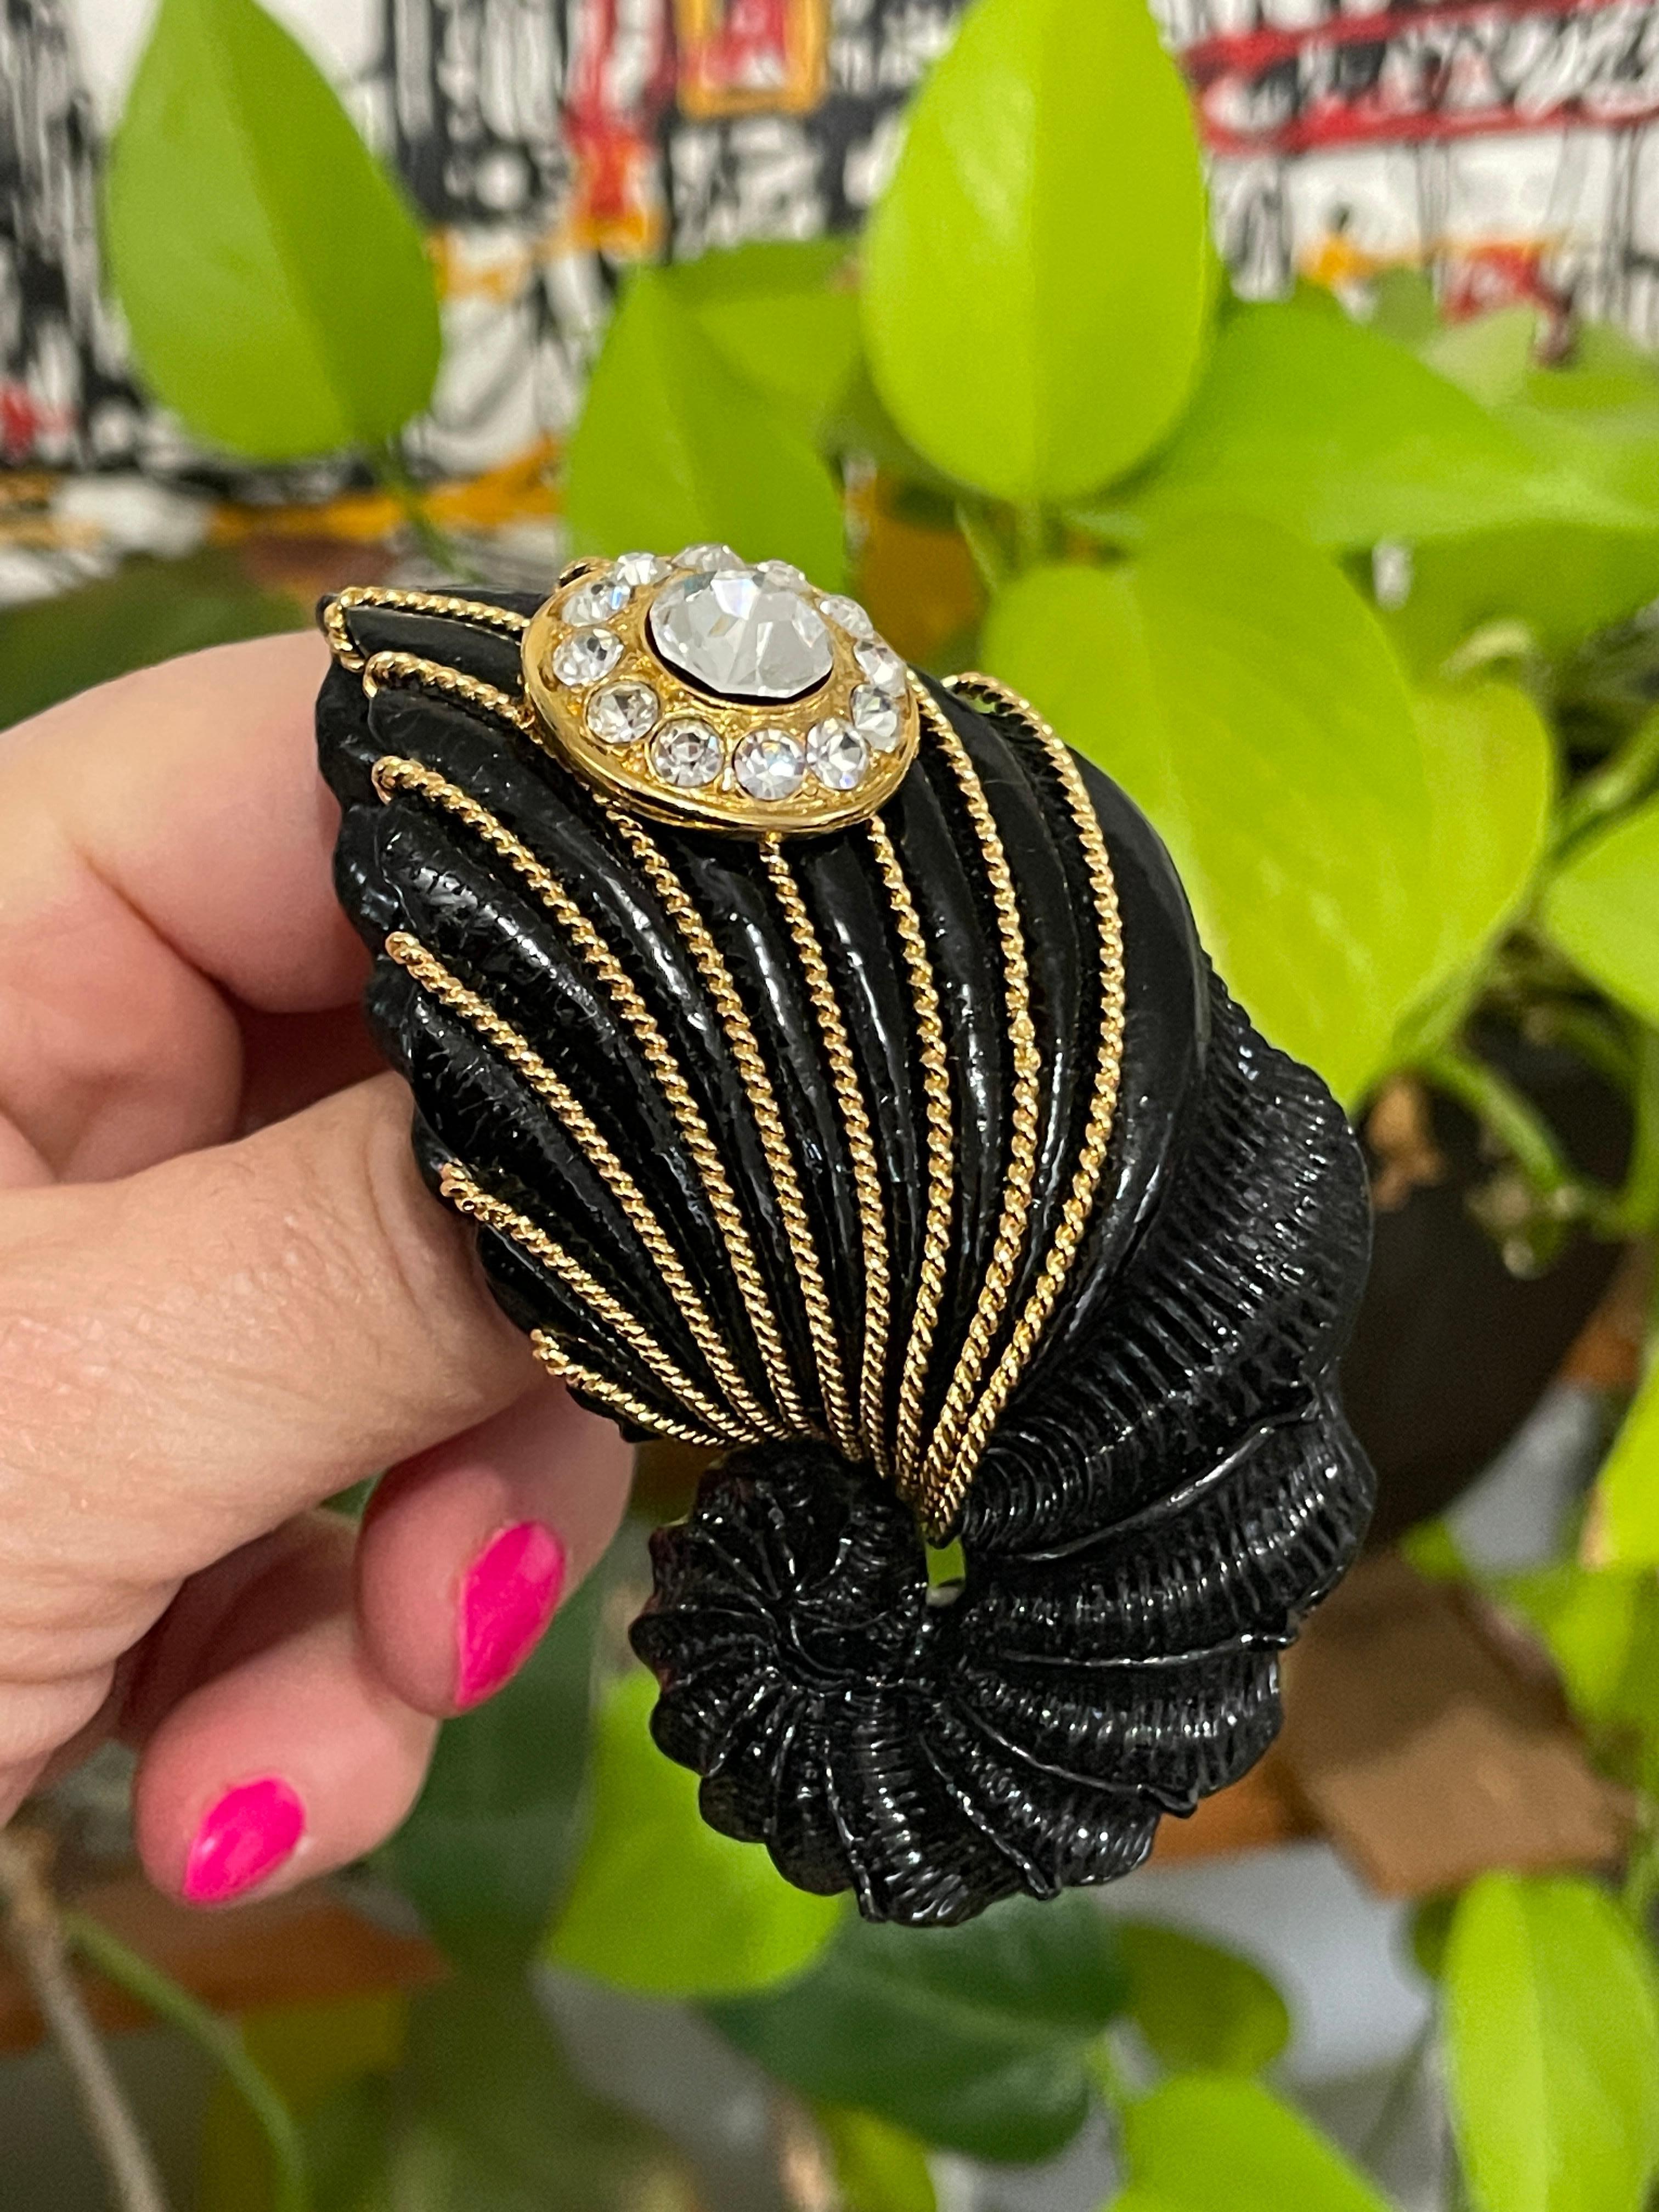 Gianfranco FERRE Brooch Black Shell Crystal New, Never worn Pin 1980s For Sale 2